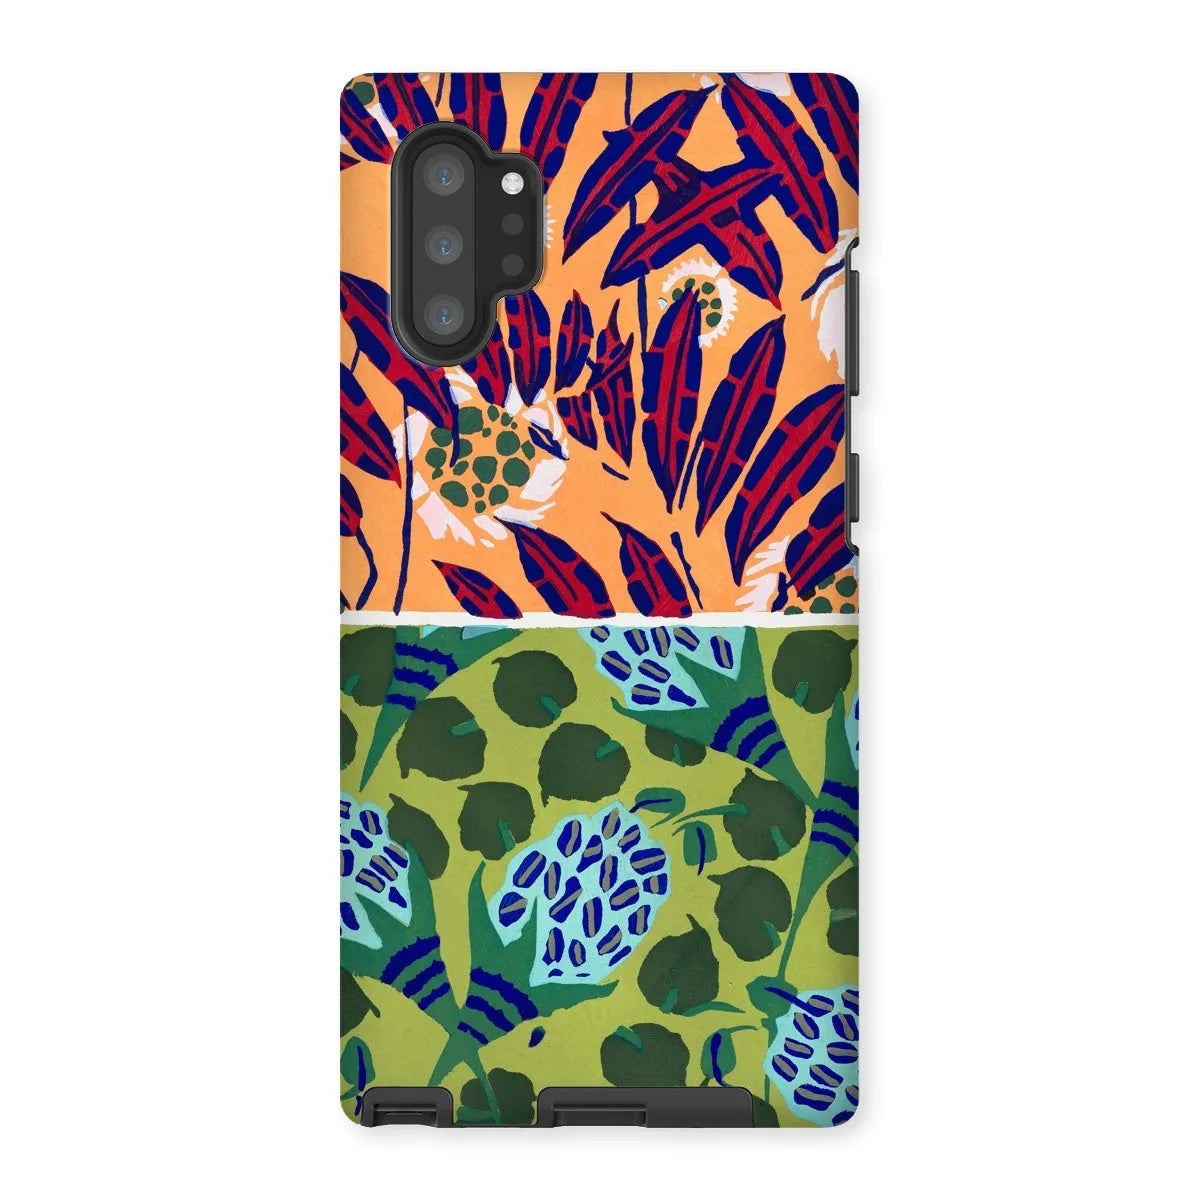 Fabric & Rugs Too - Pochoir Pattern Phone Case - E. A. Séguy - Samsung Galaxy Note 10p / Matte - Mobile Phone Cases